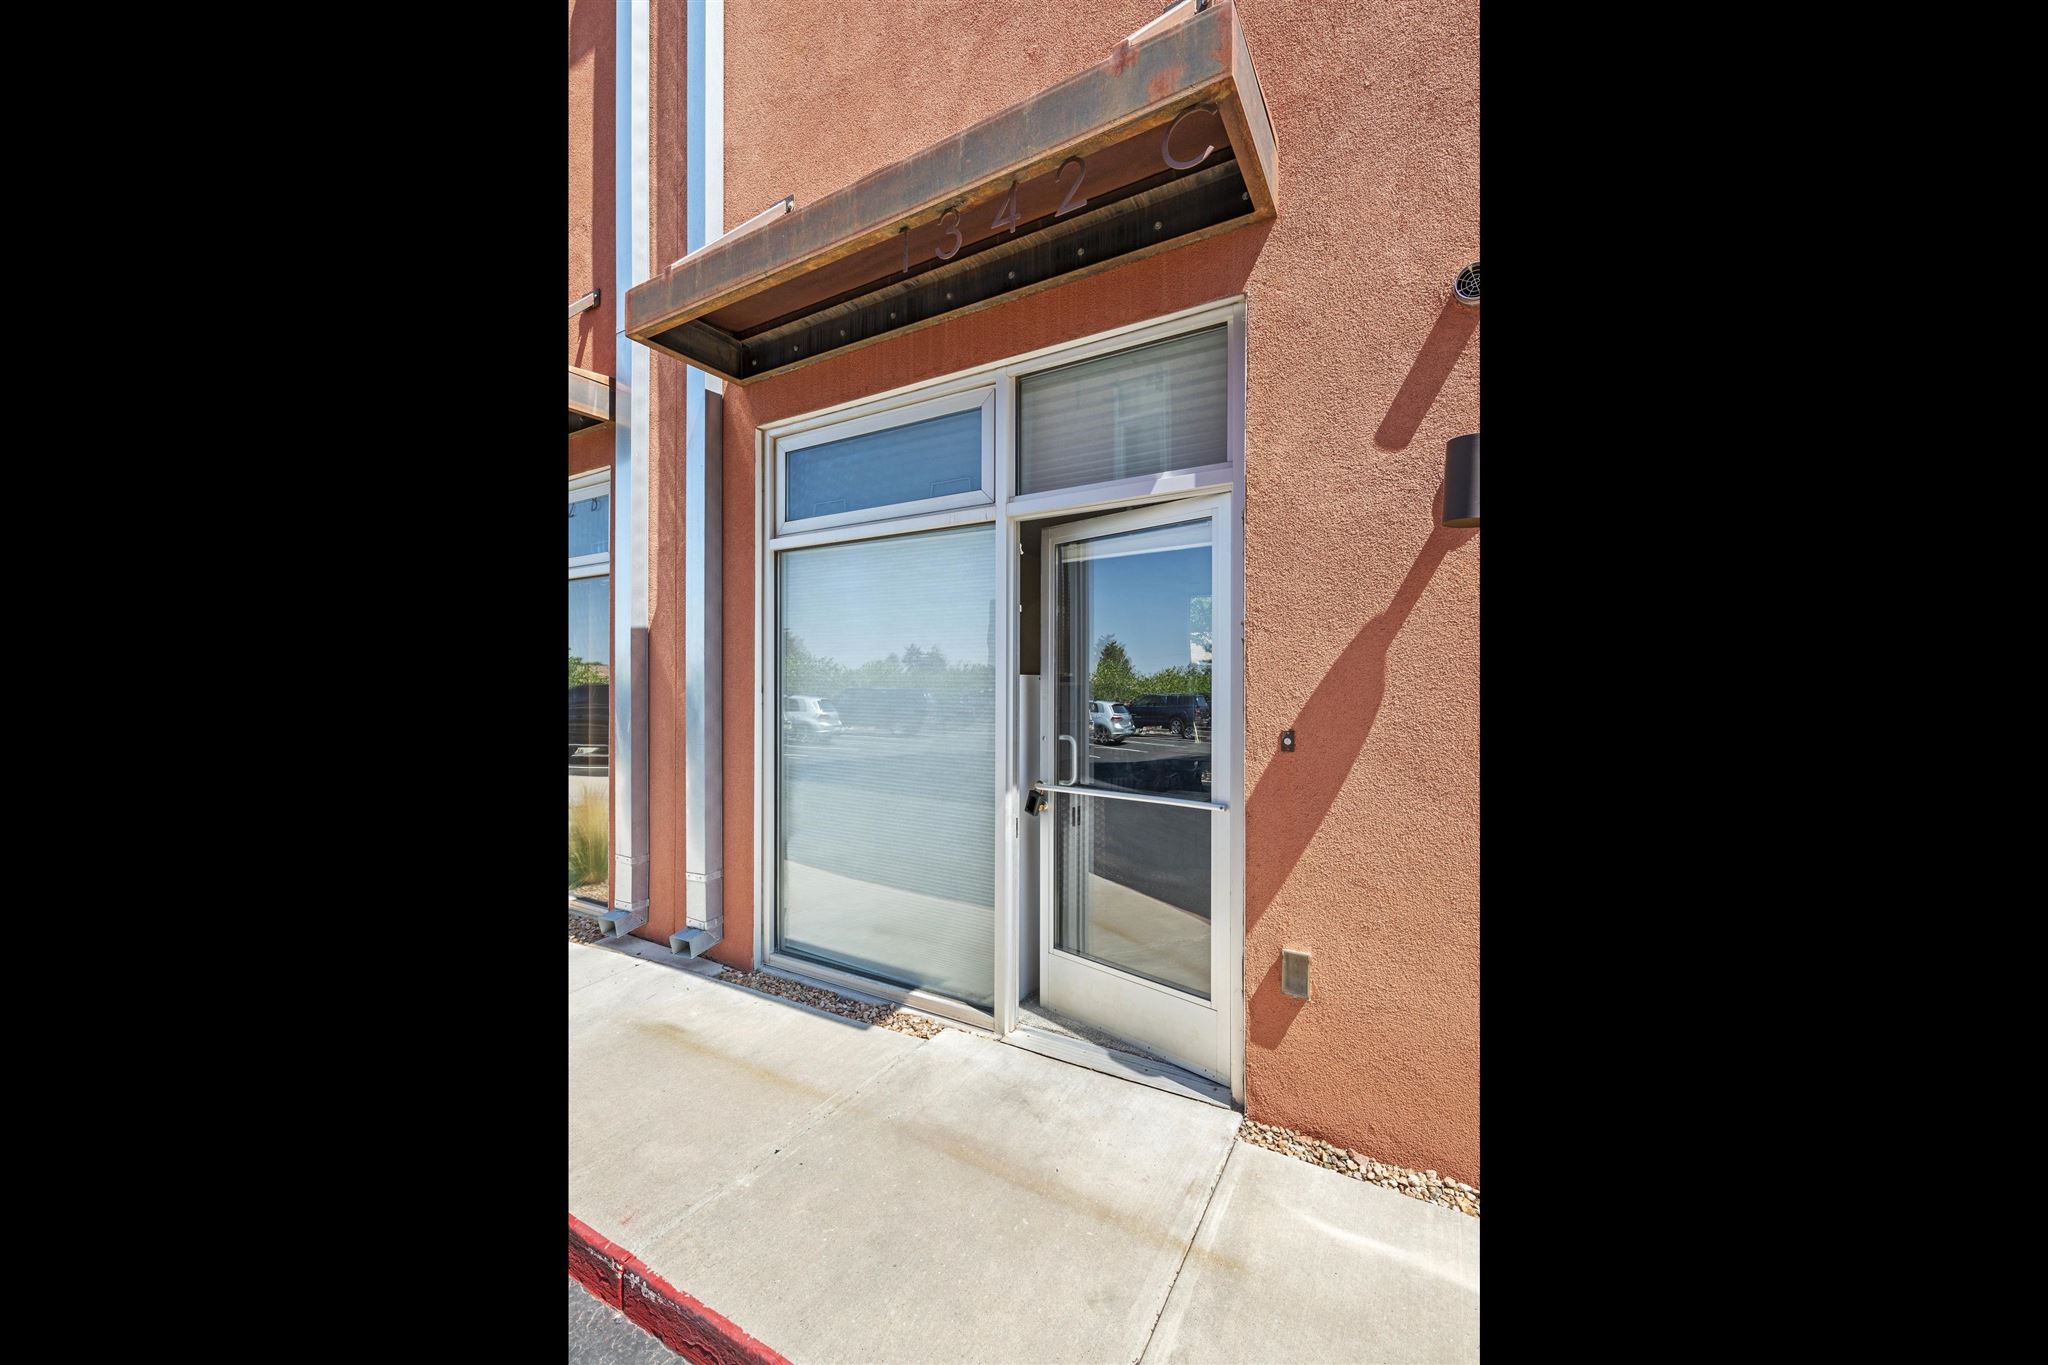 1342 Pacheco Street #C, Santa Fe, New Mexico 87505, ,Residential Lease,For Rent,1342 Pacheco Street #C,202103501